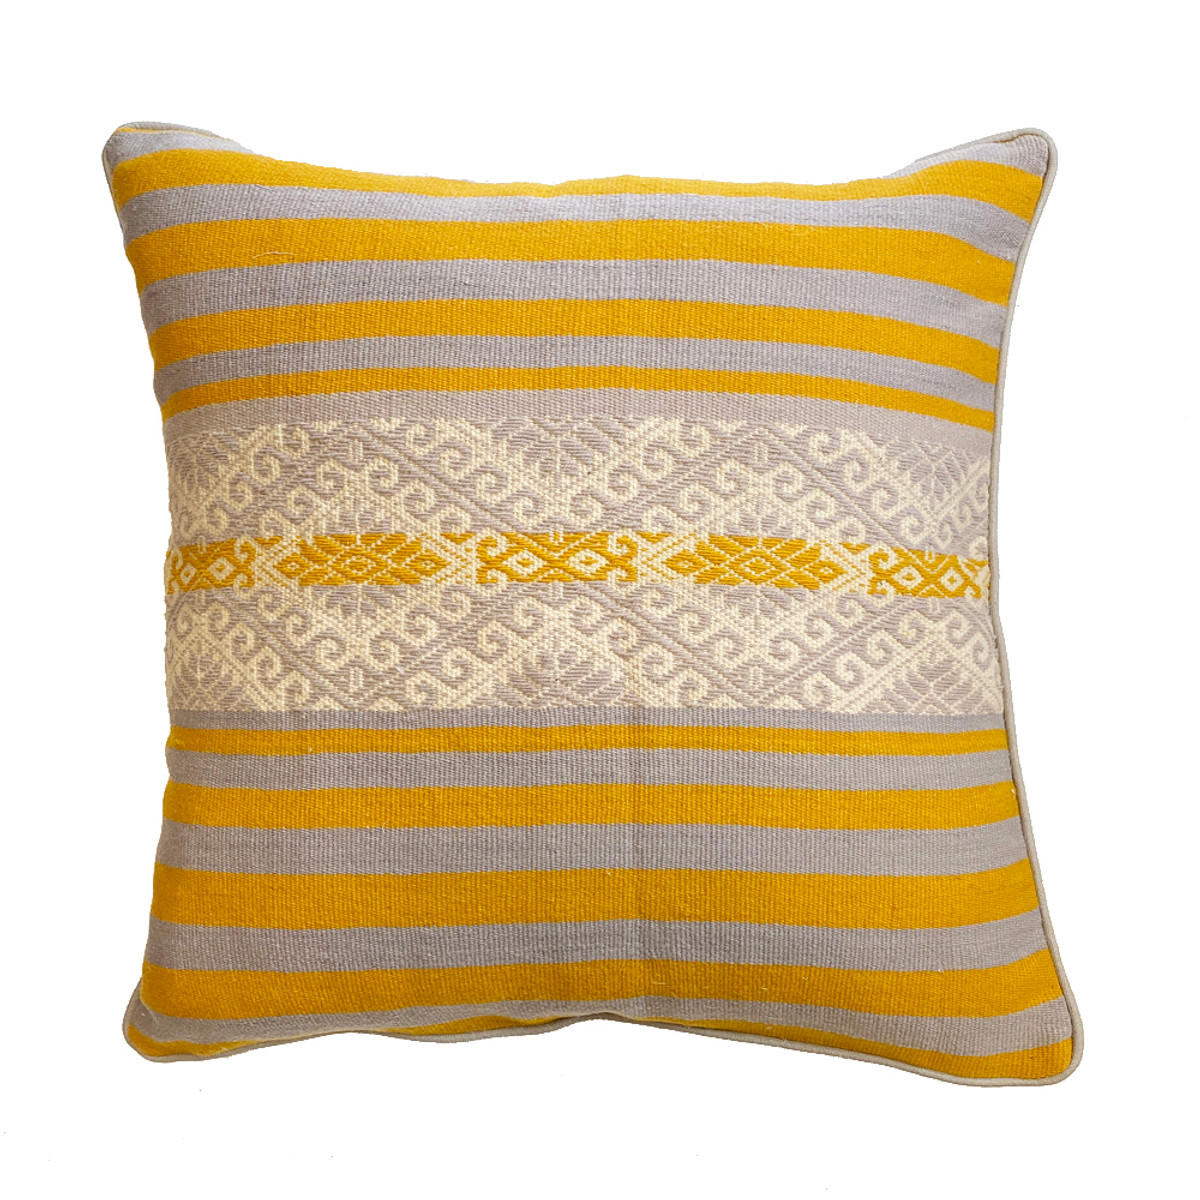 Handwoven Wool Natural Dyed Gold Pillow Peru Colors: marigold, medium grey, off white.